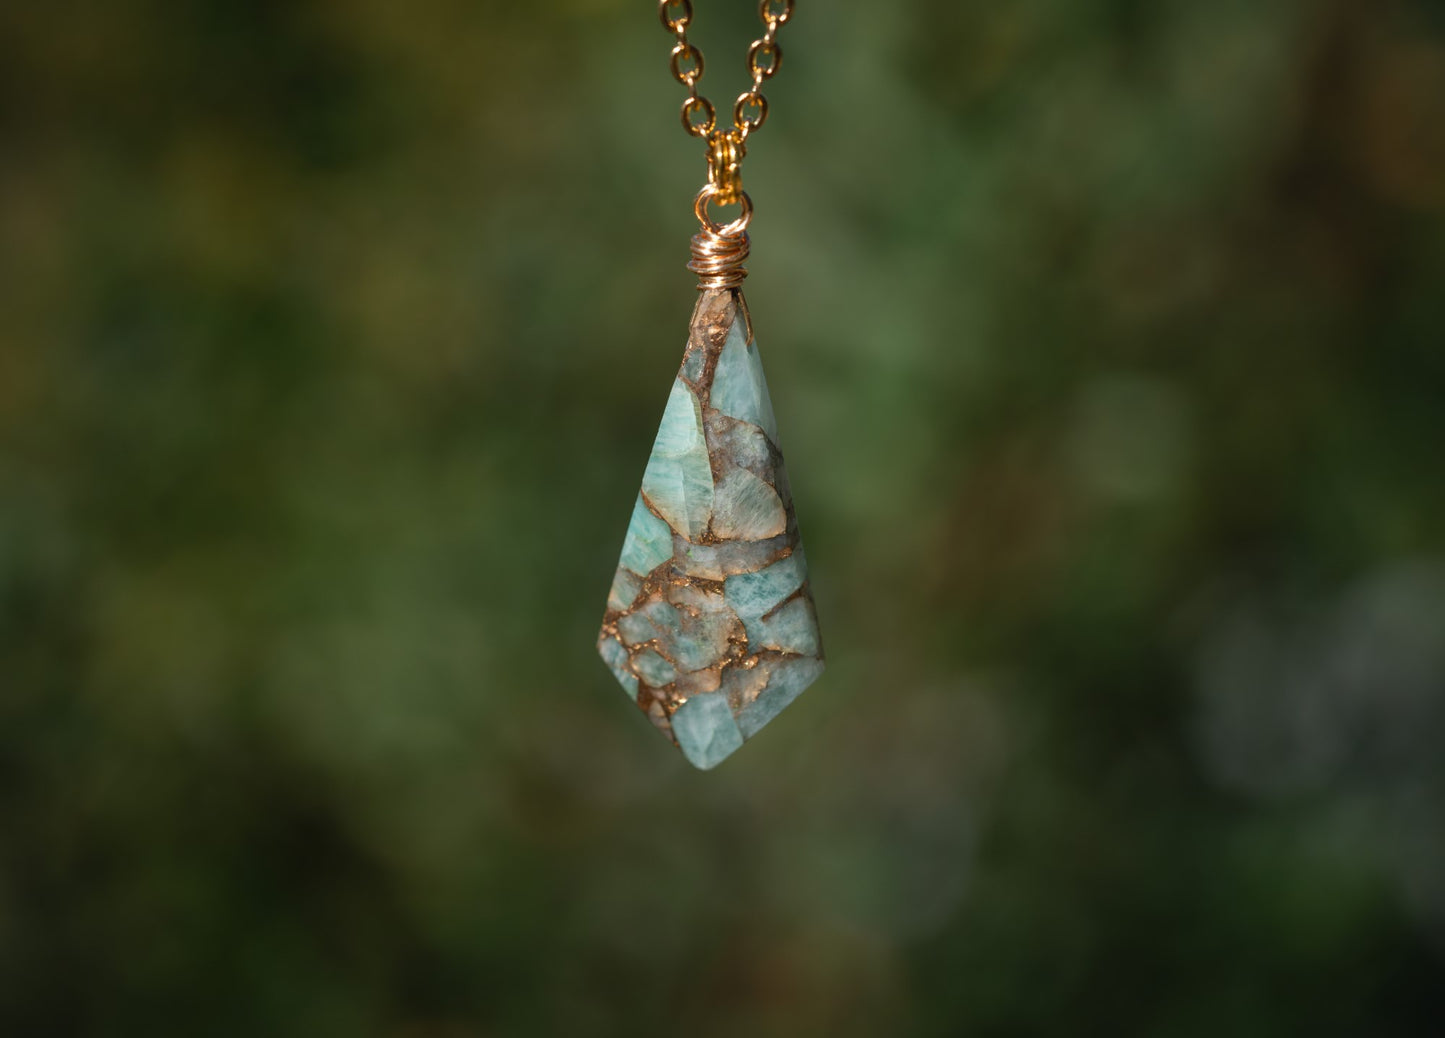 'Aligned Action' Amazonite Copper Turquoise INverted Shield Gold Plated Stainless Steel Necklace